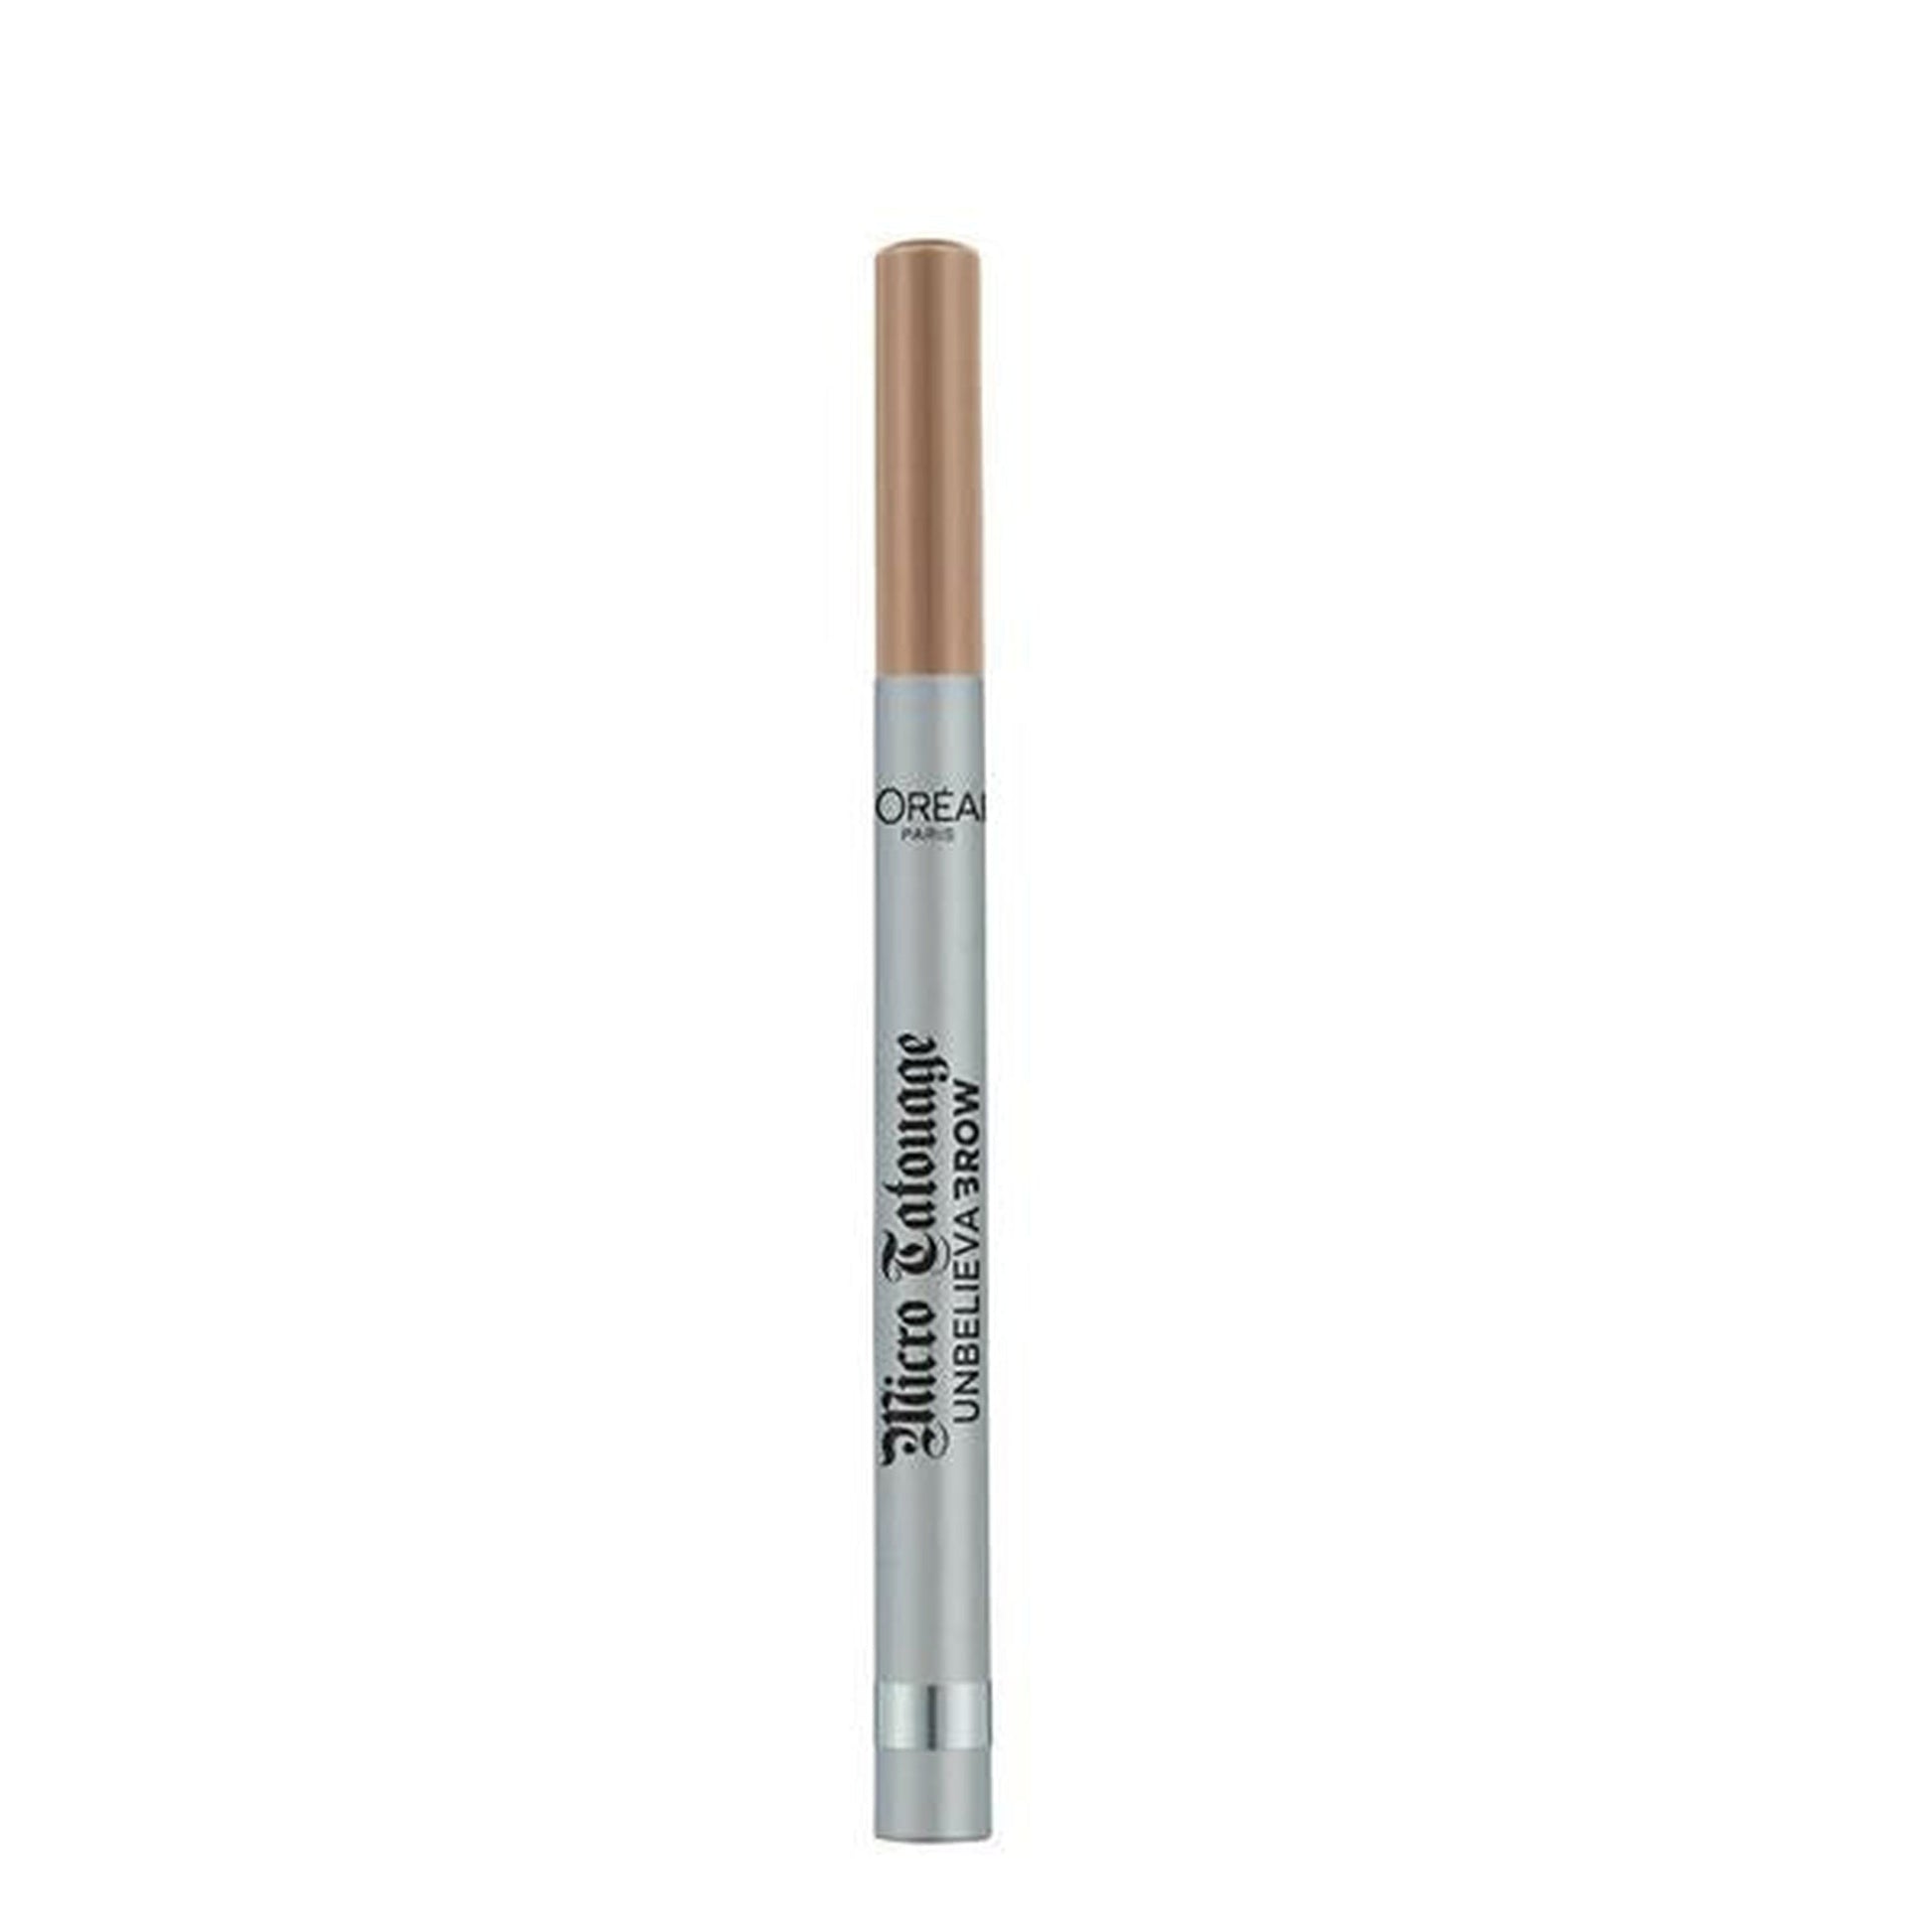 L'Oreal Brow Artist Micro Tatouage UNBELIEVABROW 101 Blonde-L'Oreal-BeautyNmakeup.co.uk